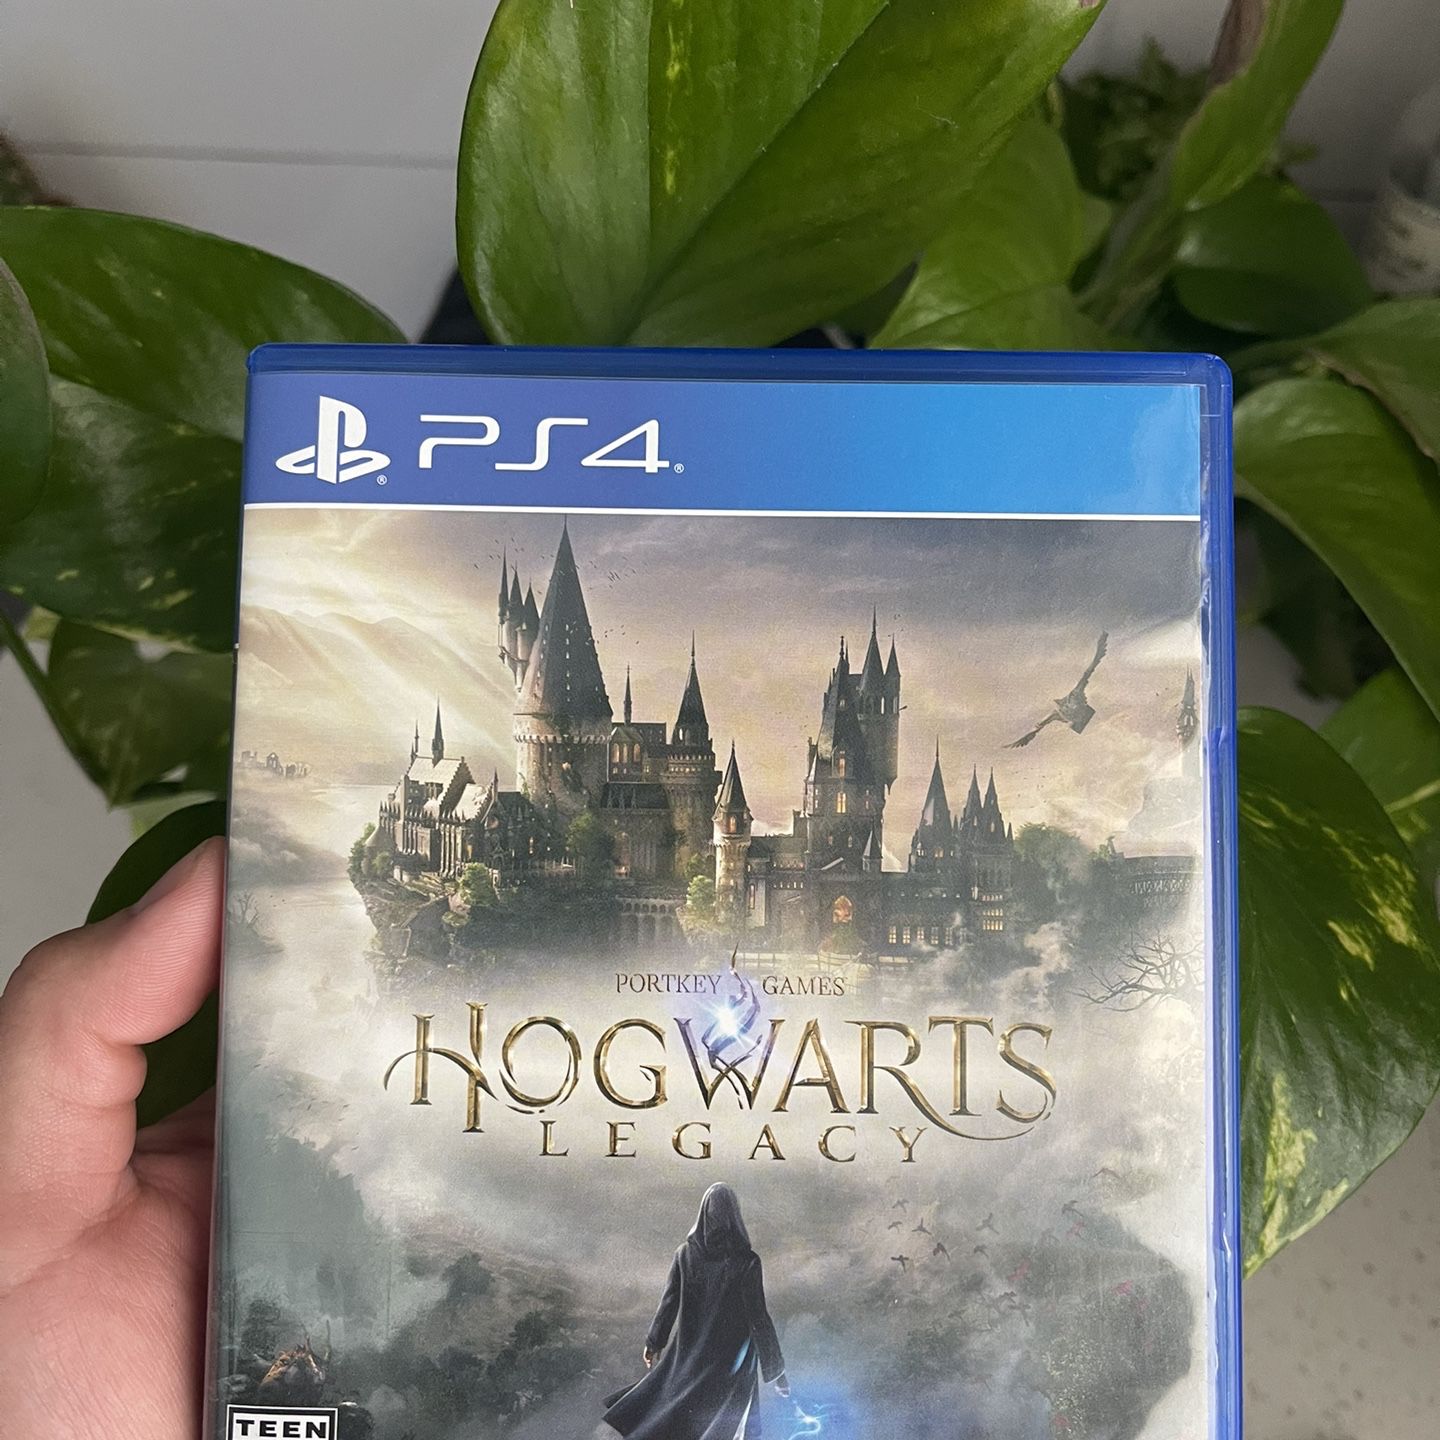 Buy Hogwarts Legacy PS4 Game, PS4 games